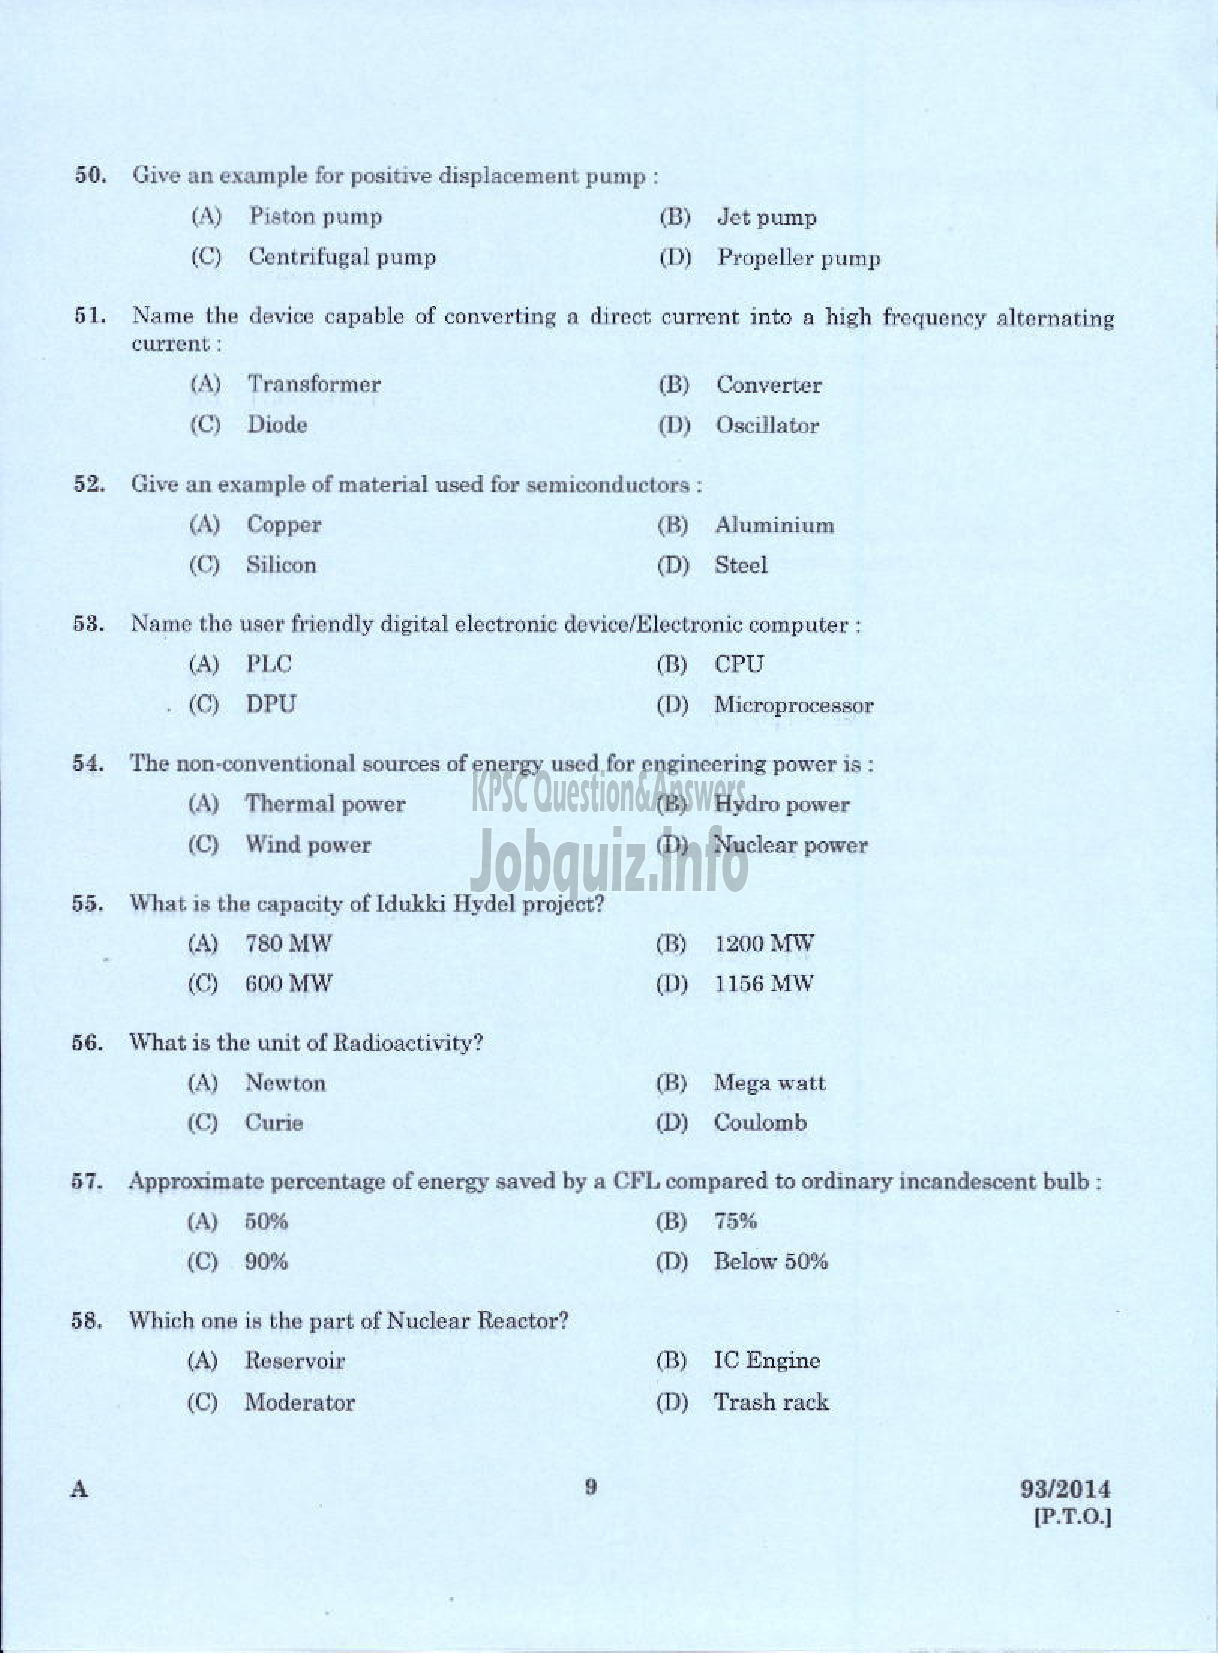 Kerala PSC Question Paper - DEMONSTRATOR IN TOOL AND DIE ENGINEERING TECHNICAL EDUCATION DEPARTMENT-7